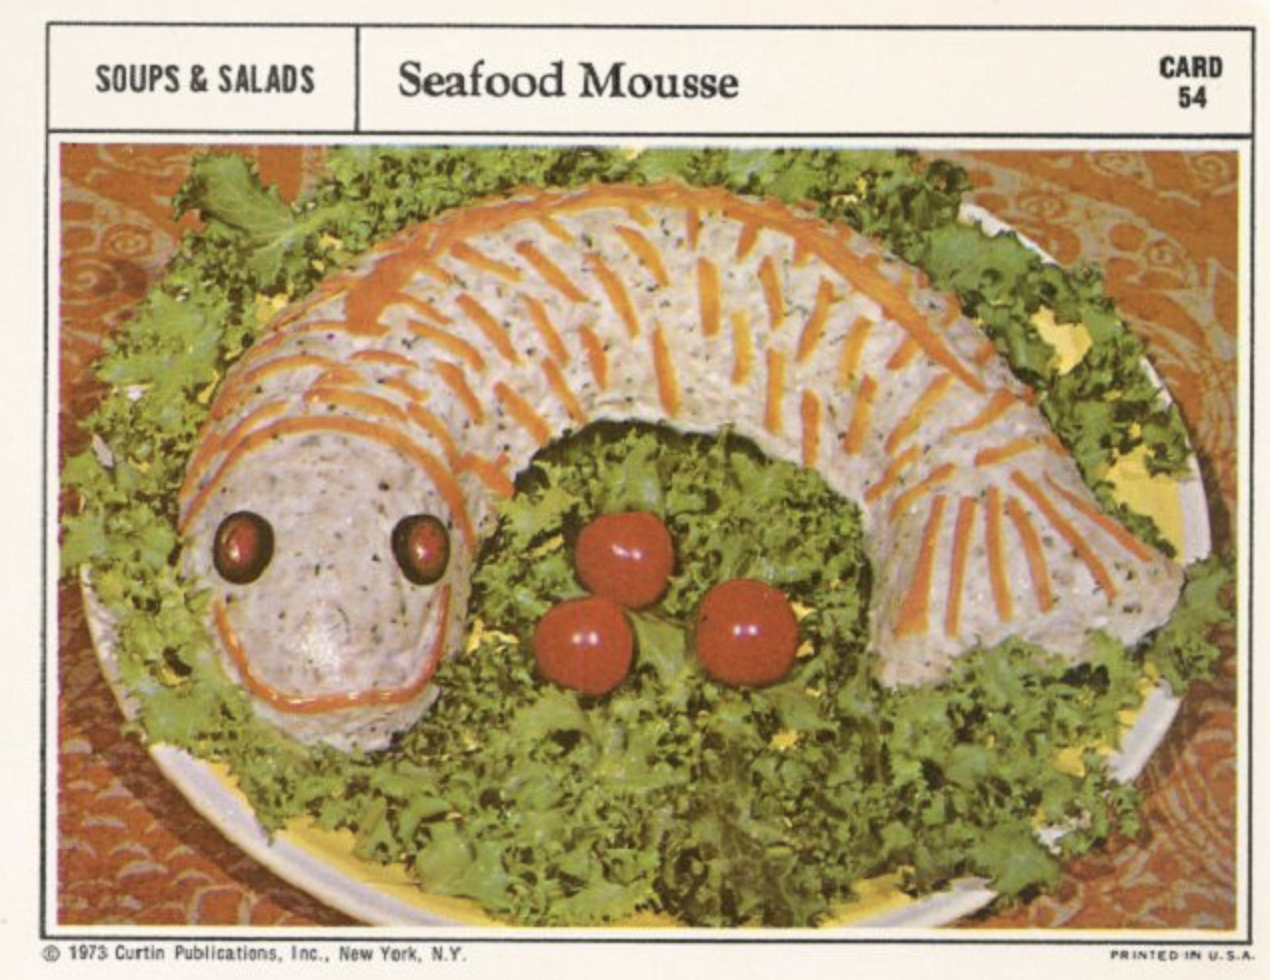 weird 1950s recipes - Soups & Salads Seafood Mousse Card 54 1973 Curtin Publications, Inc., New York, Ny. Printed In Usa